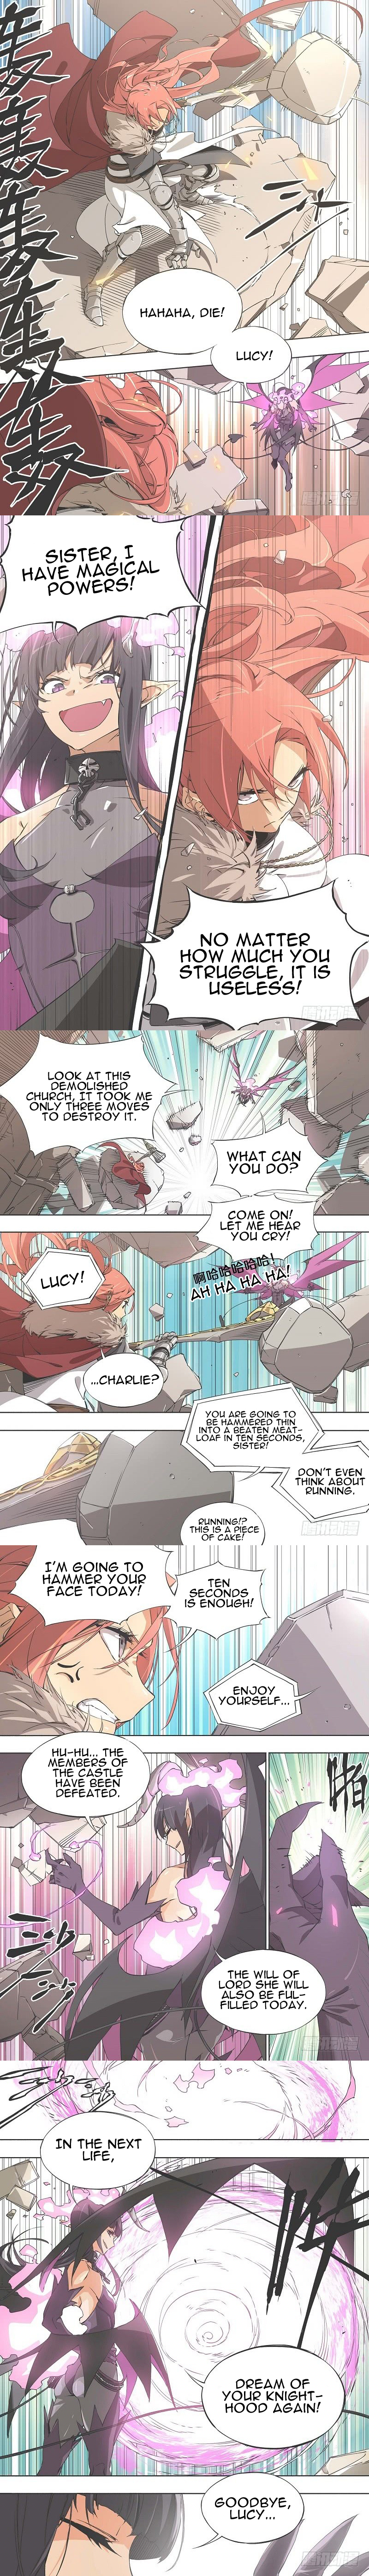 My Hammer Girl Ch. 1 Watch out for the hammer!